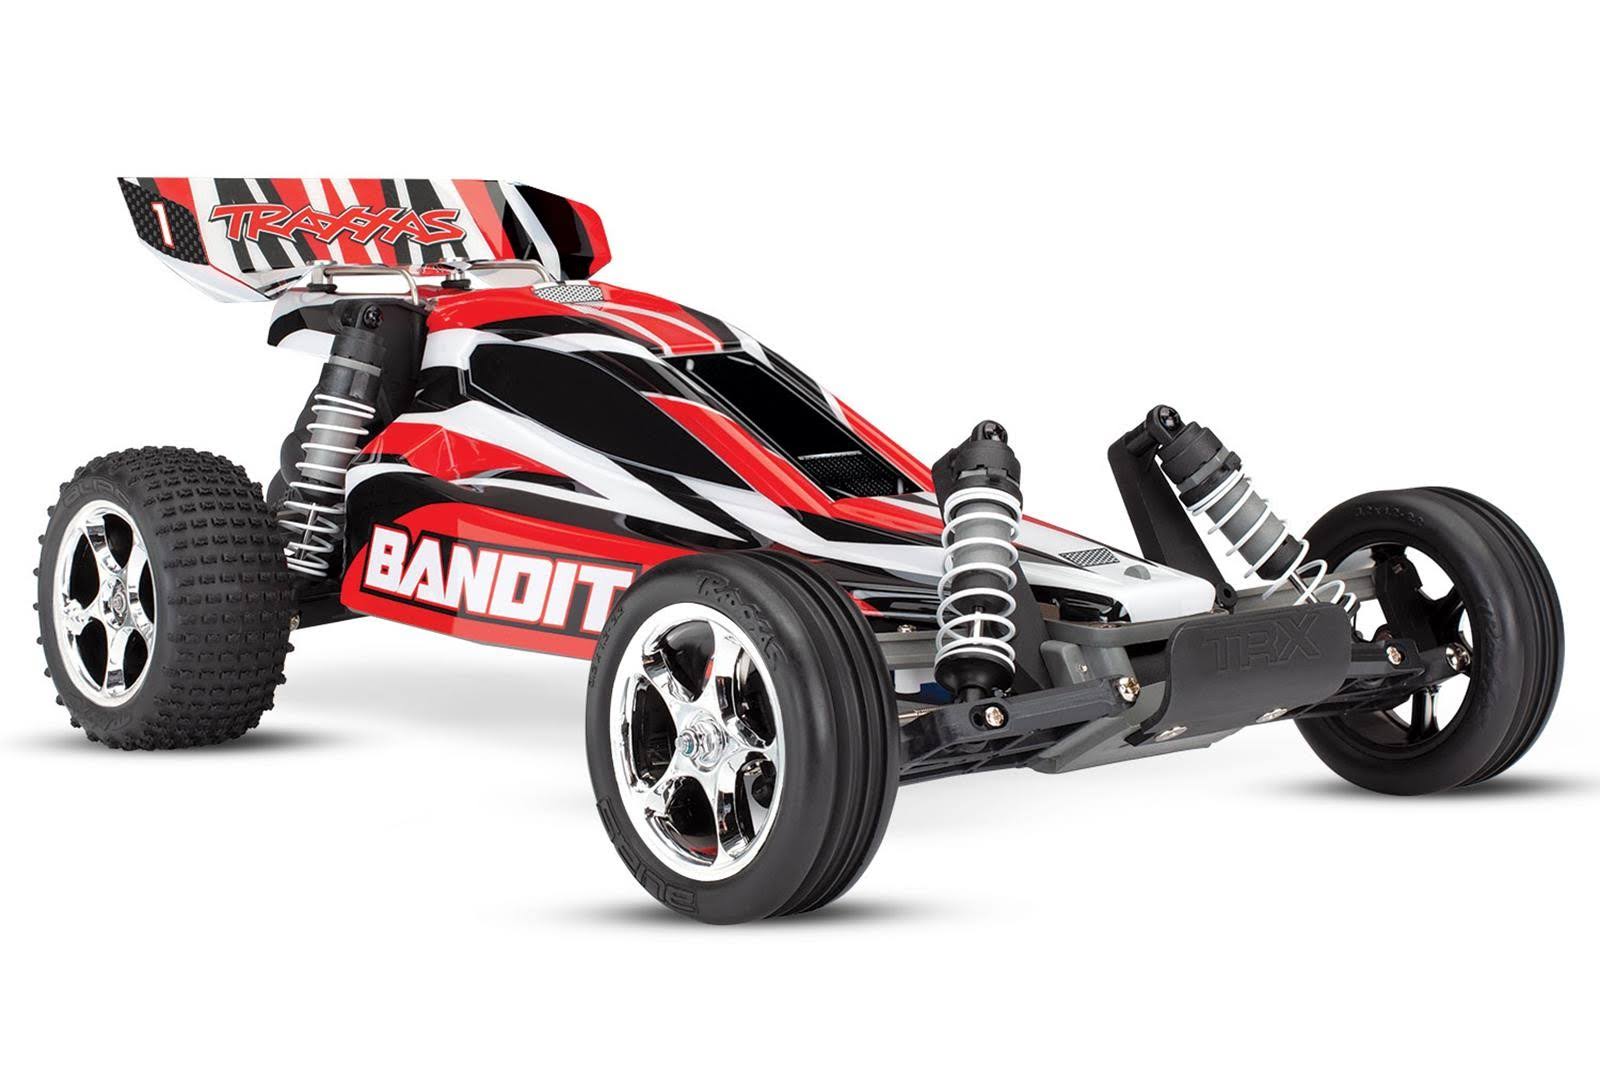 Traxxas Bandit VXL: 1/10 Scale Off-Road Buggy with TQi 2.4GHz Radio System